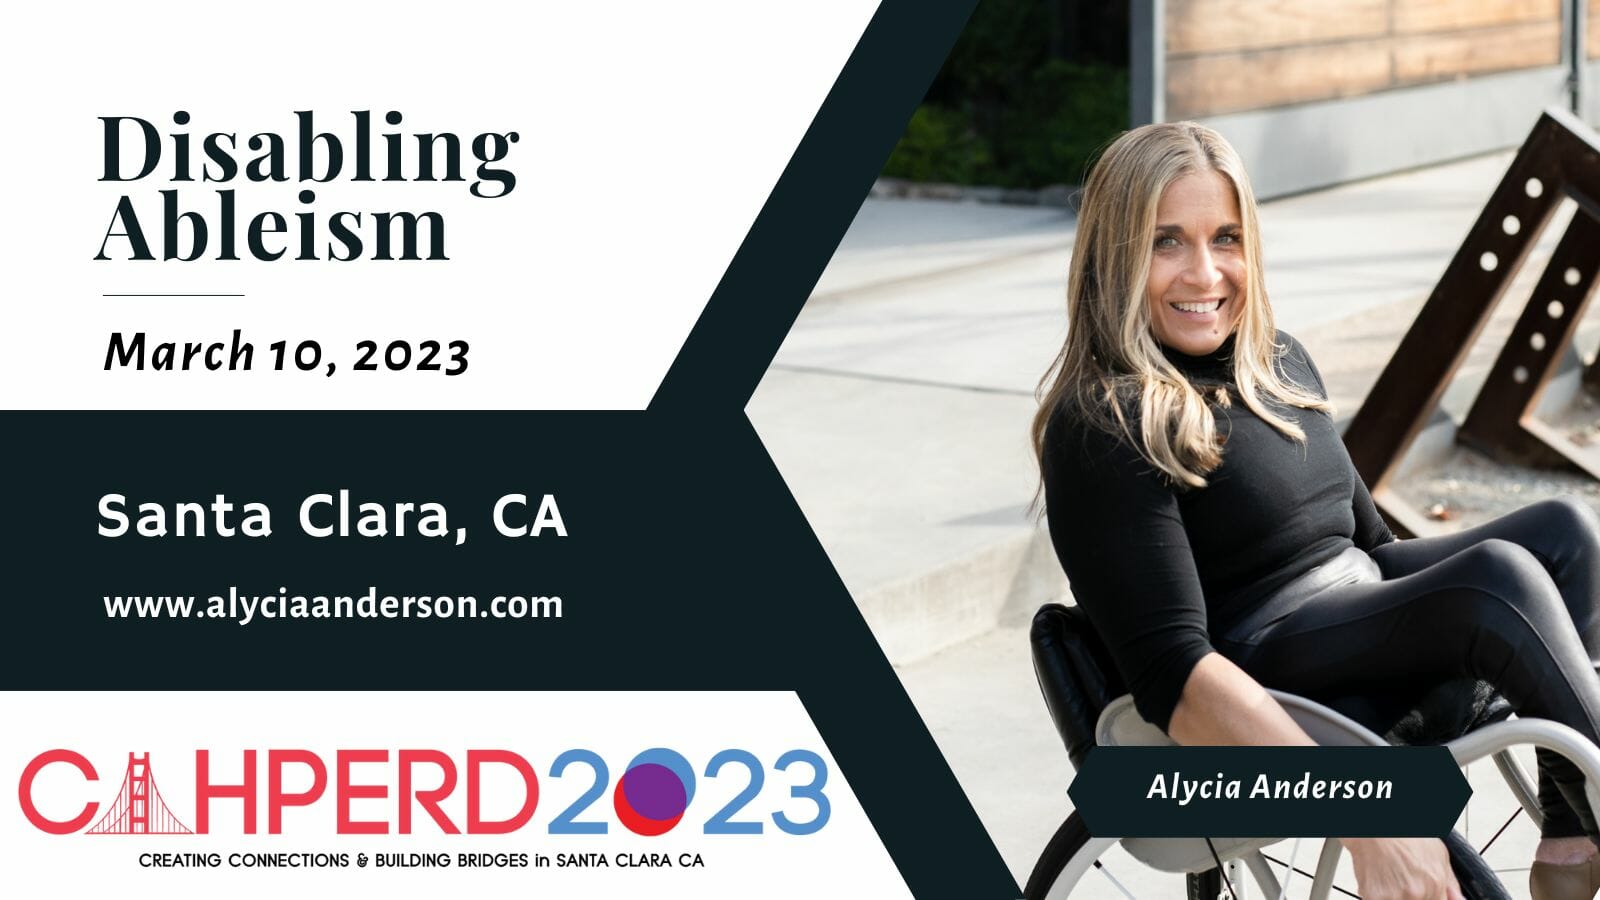 ID: Alycia wearing all black sitting in wheelchair with dark blue marketing announcement of CAHPERD 2023 conference that says be sure to attend. Alycia session on disabling ableism.